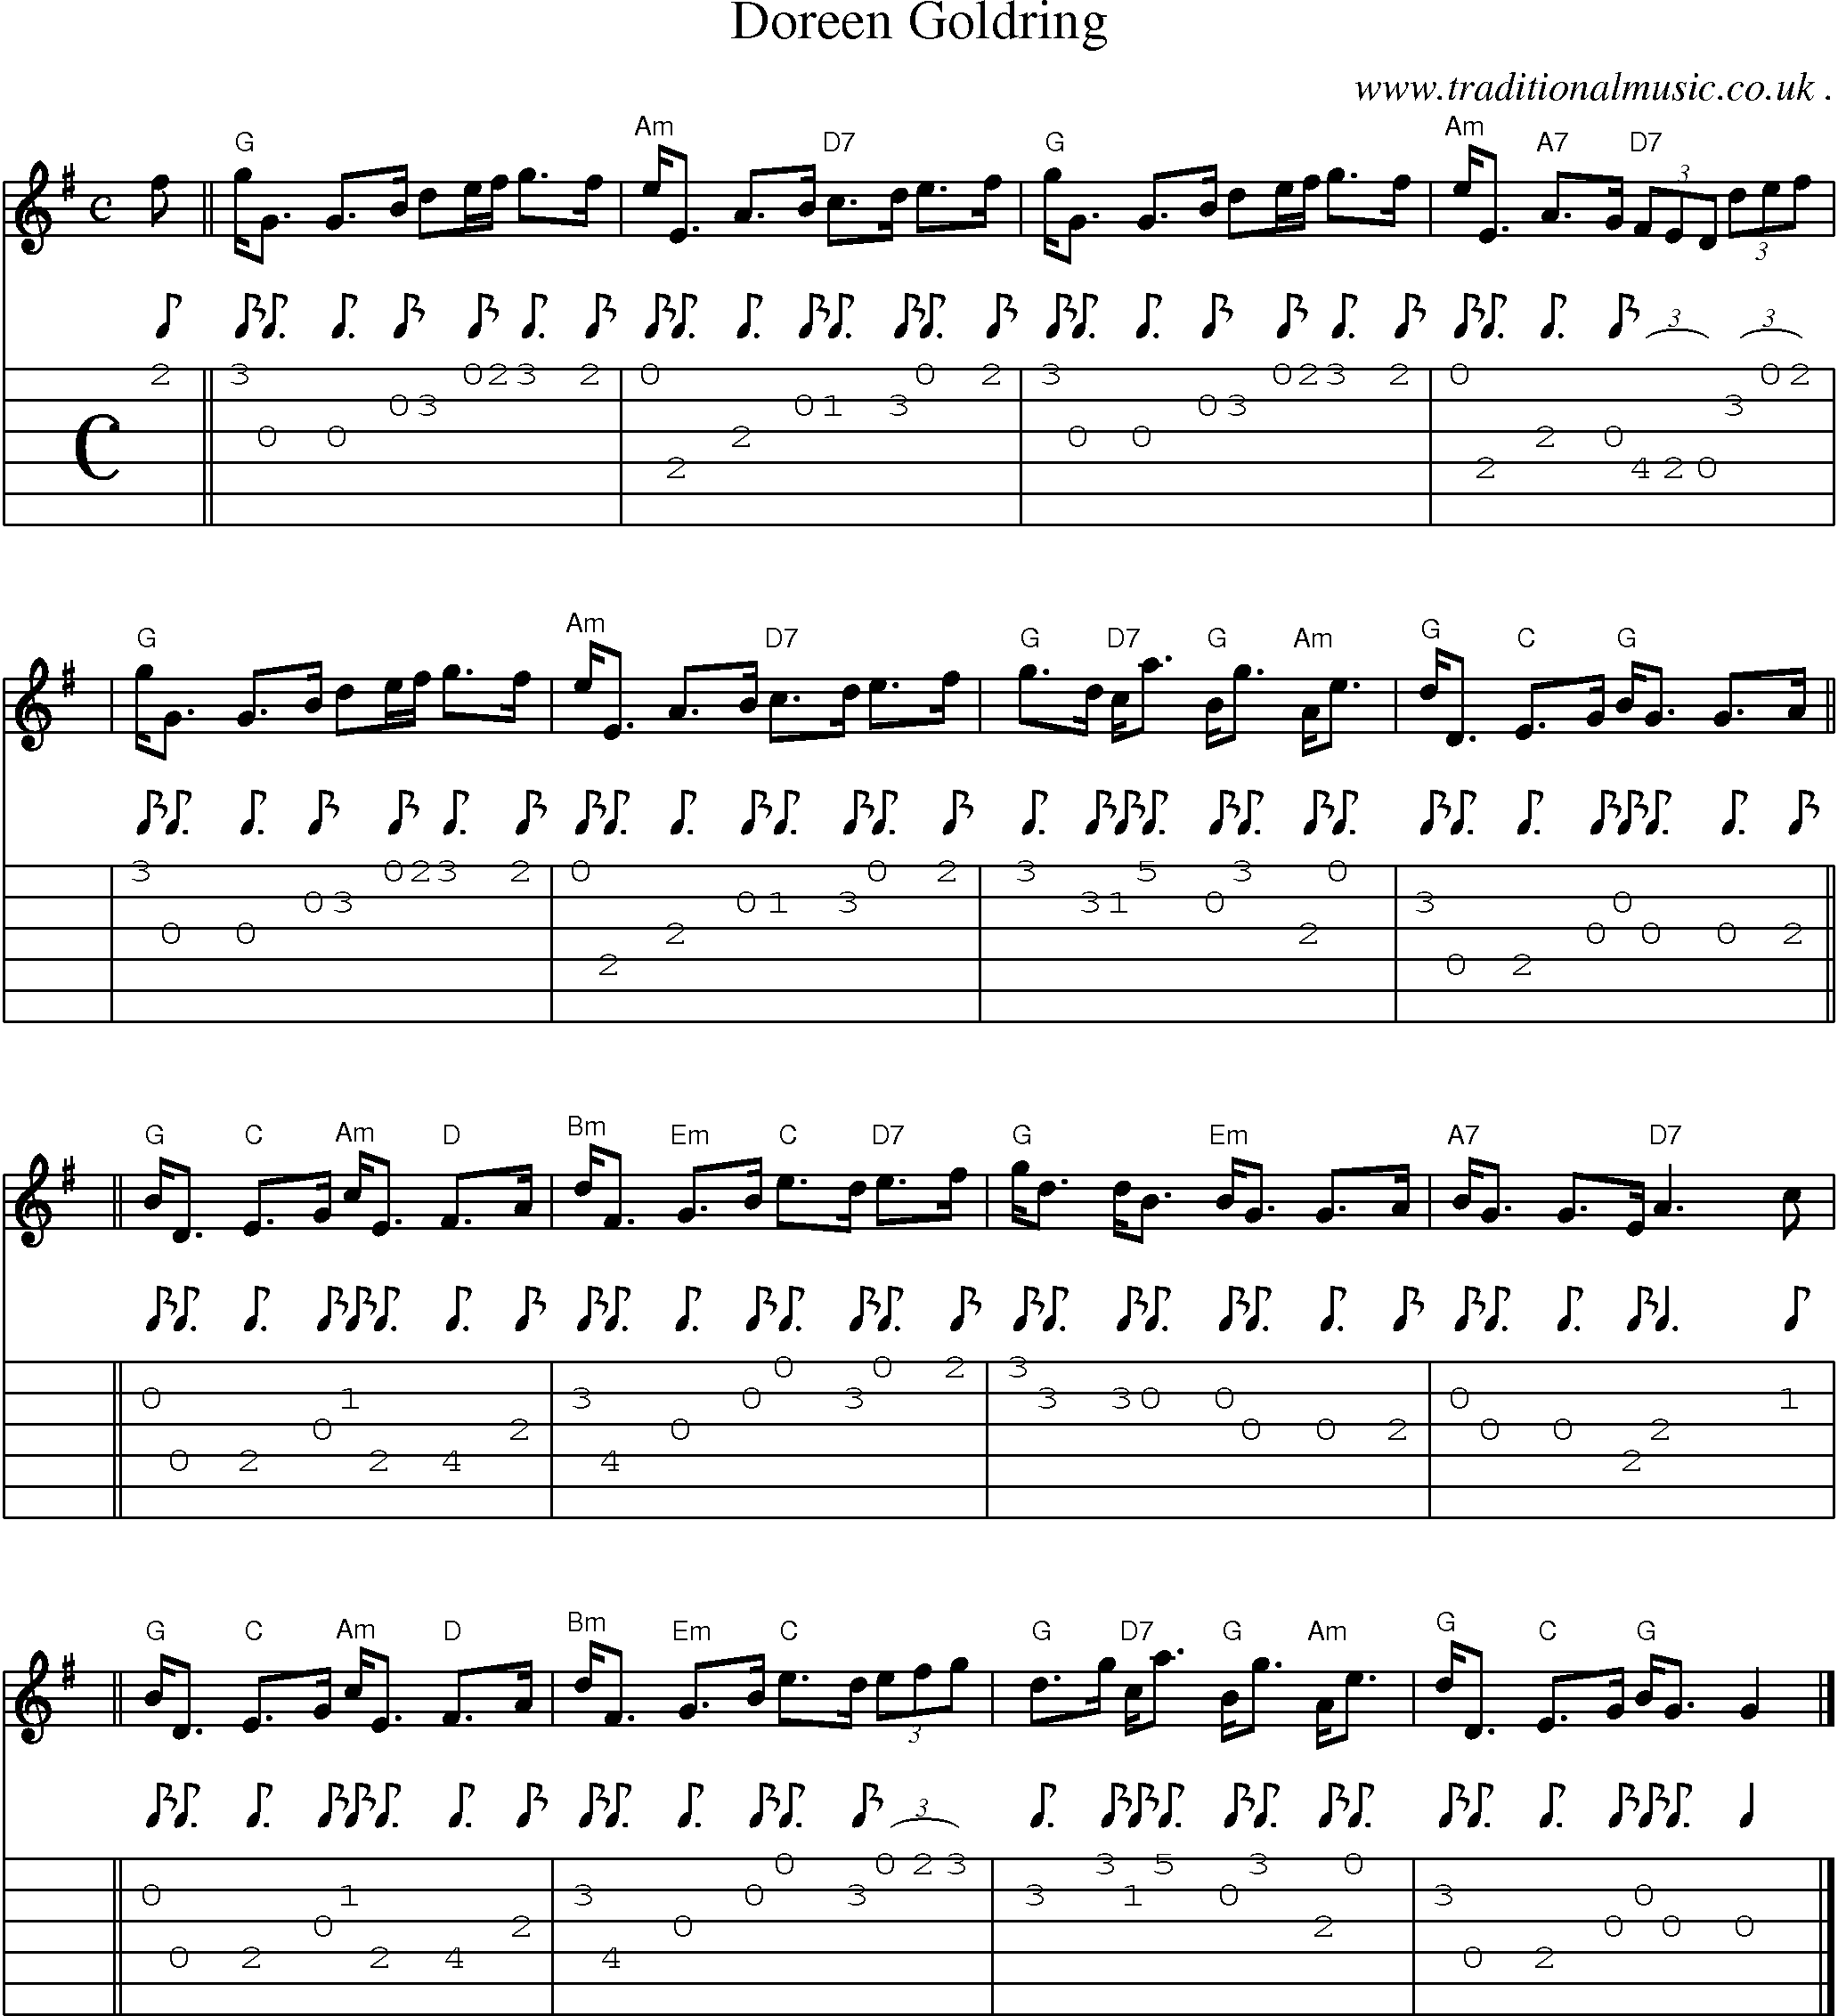 Sheet-music  score, Chords and Guitar Tabs for Doreen Goldring